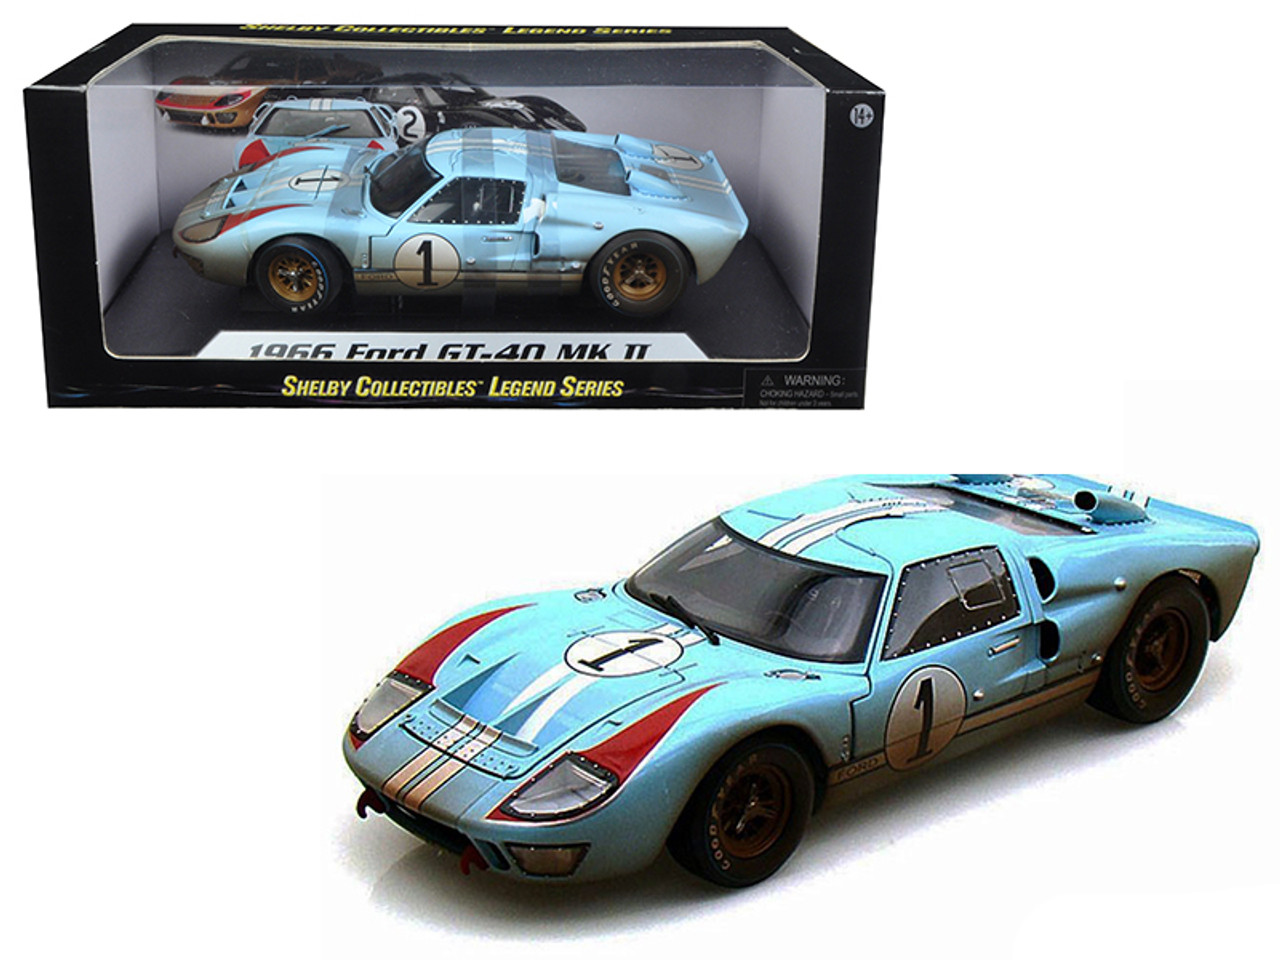 1/18 Shelby Collectibles Ford GT-40 GT40 MK II MKII #1 Dirty Edition (Blue) Diecast Car Model